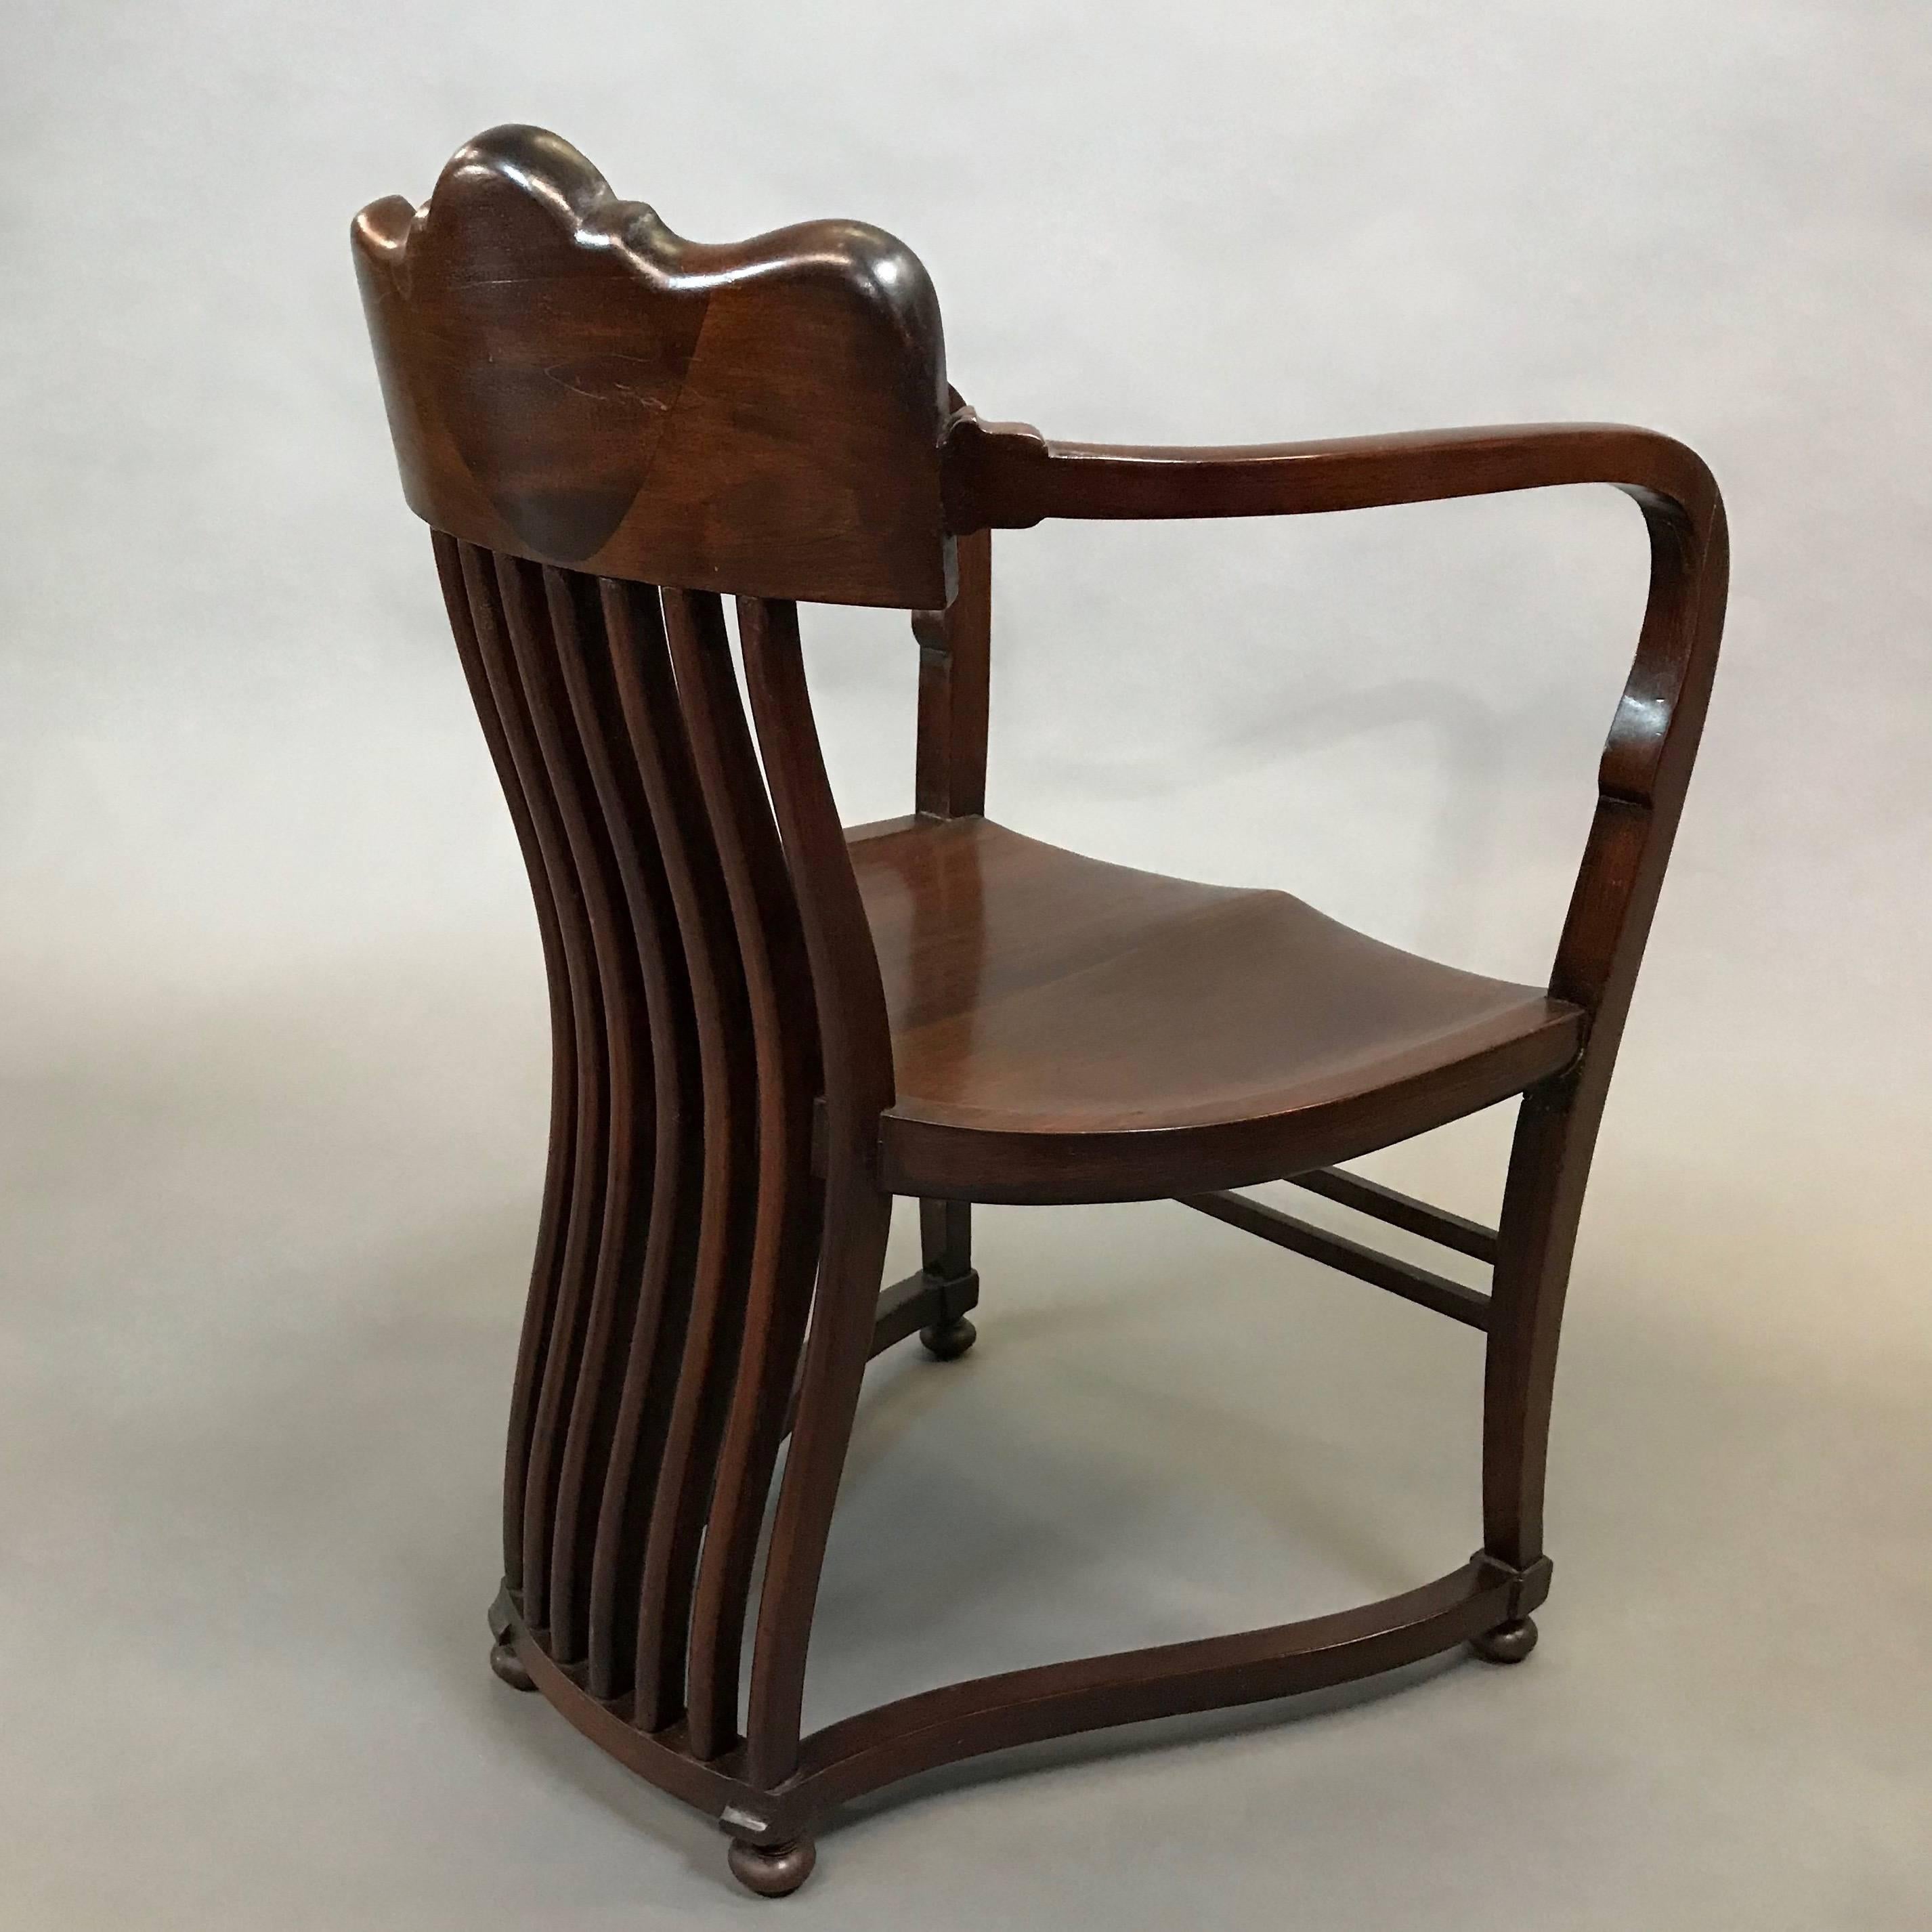 American Classical 19th Century American Mahogany Armchair with Mother-of-Pearl Detail